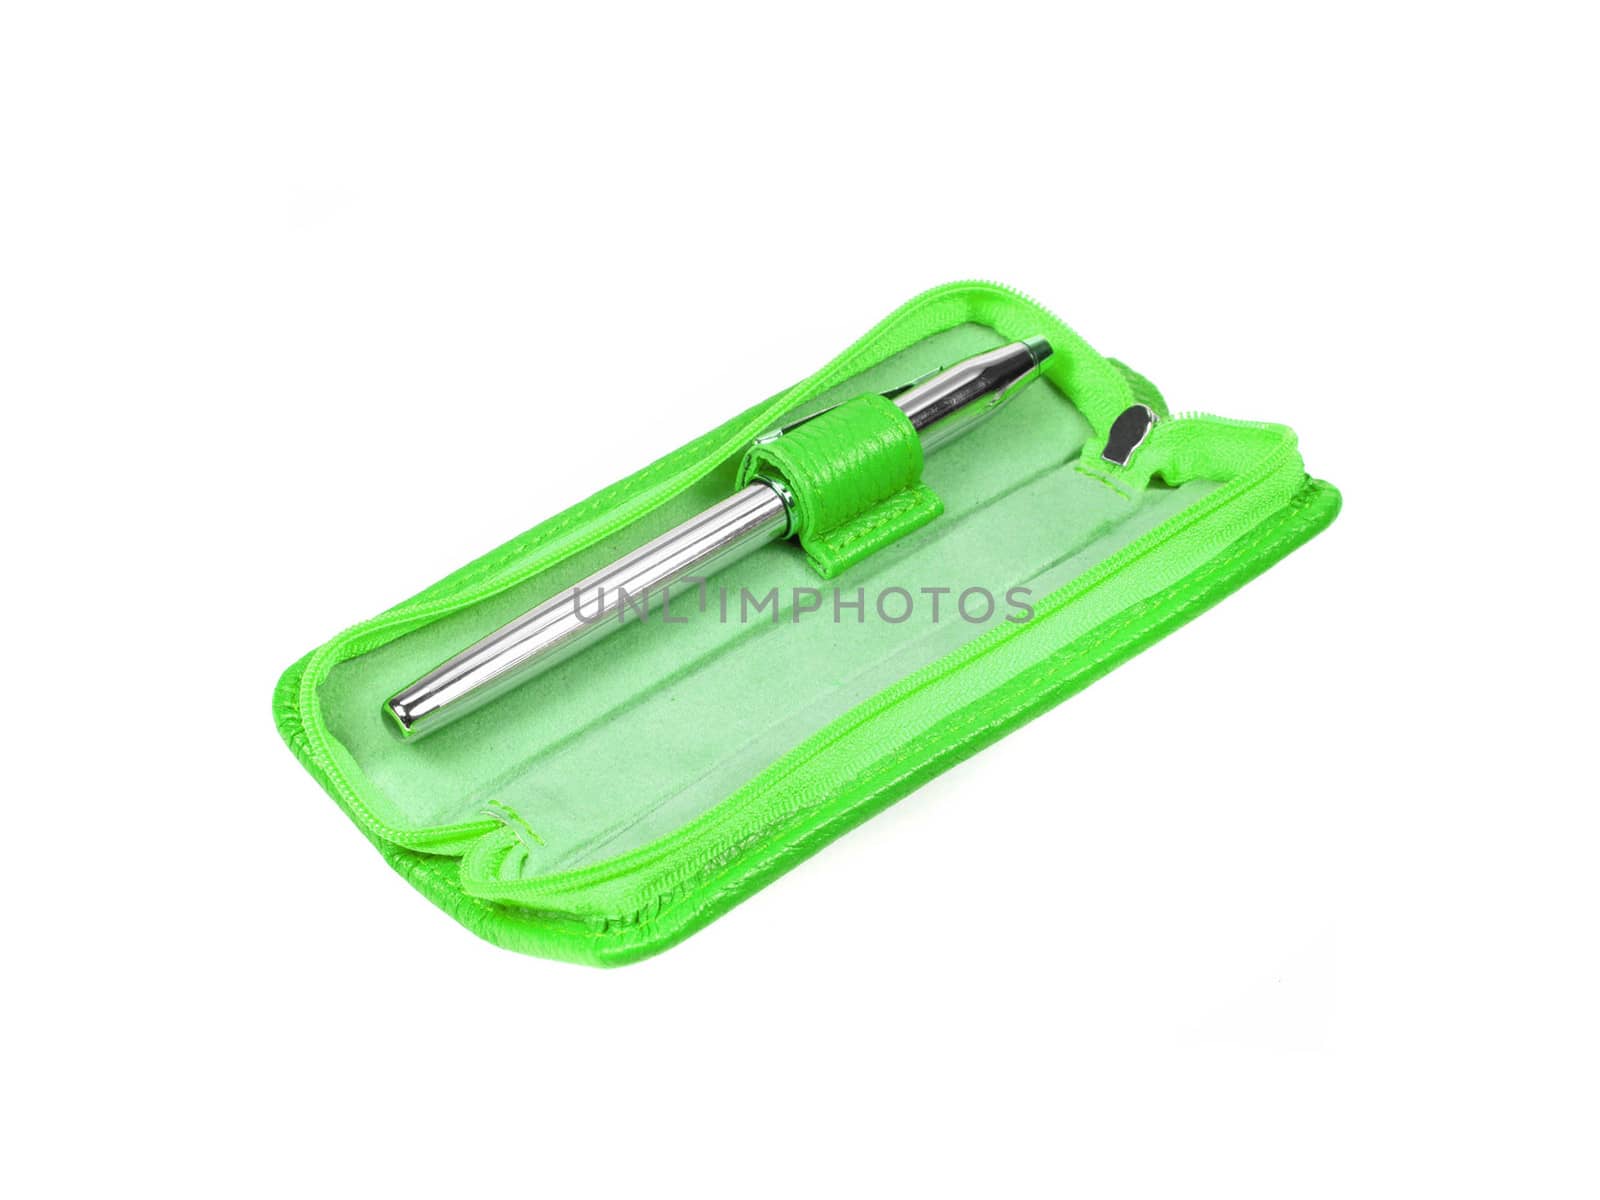 Green pen case isolated